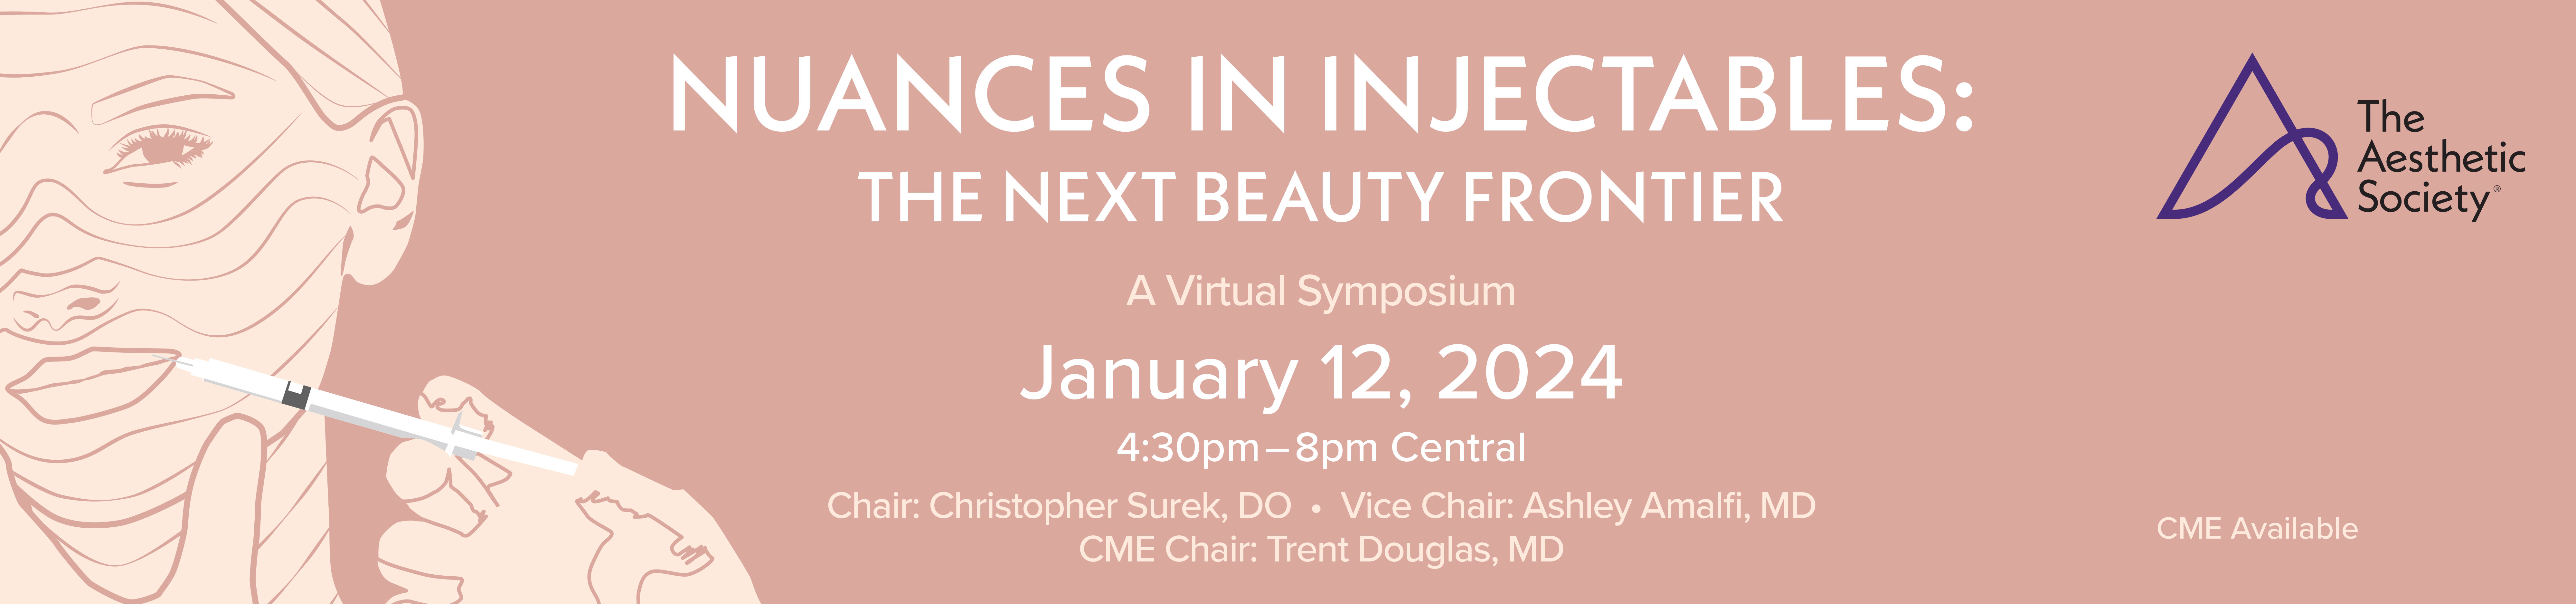 The Aesthetic Society Nuances in Injectables